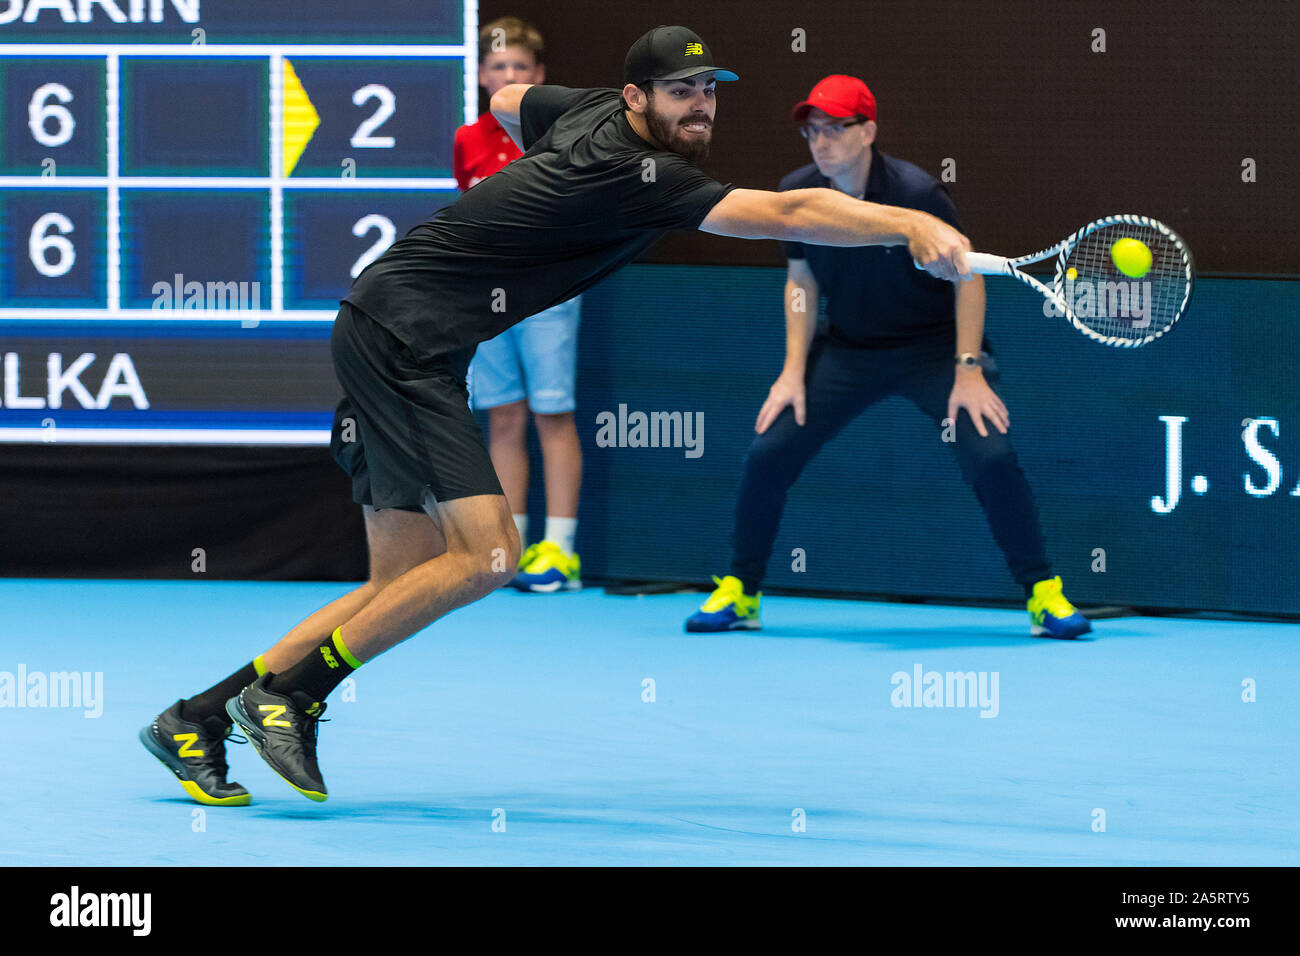 St. Jakobshalle, Basel, Switzerland. 22nd Oct, 2019. ATP World Tour Tennis,  Swiss Indoors; Reilly Opelka (USA) returns a serve against Christian Garin  (CHI) - Editorial Use Credit: Action Plus Sports/Alamy Live News